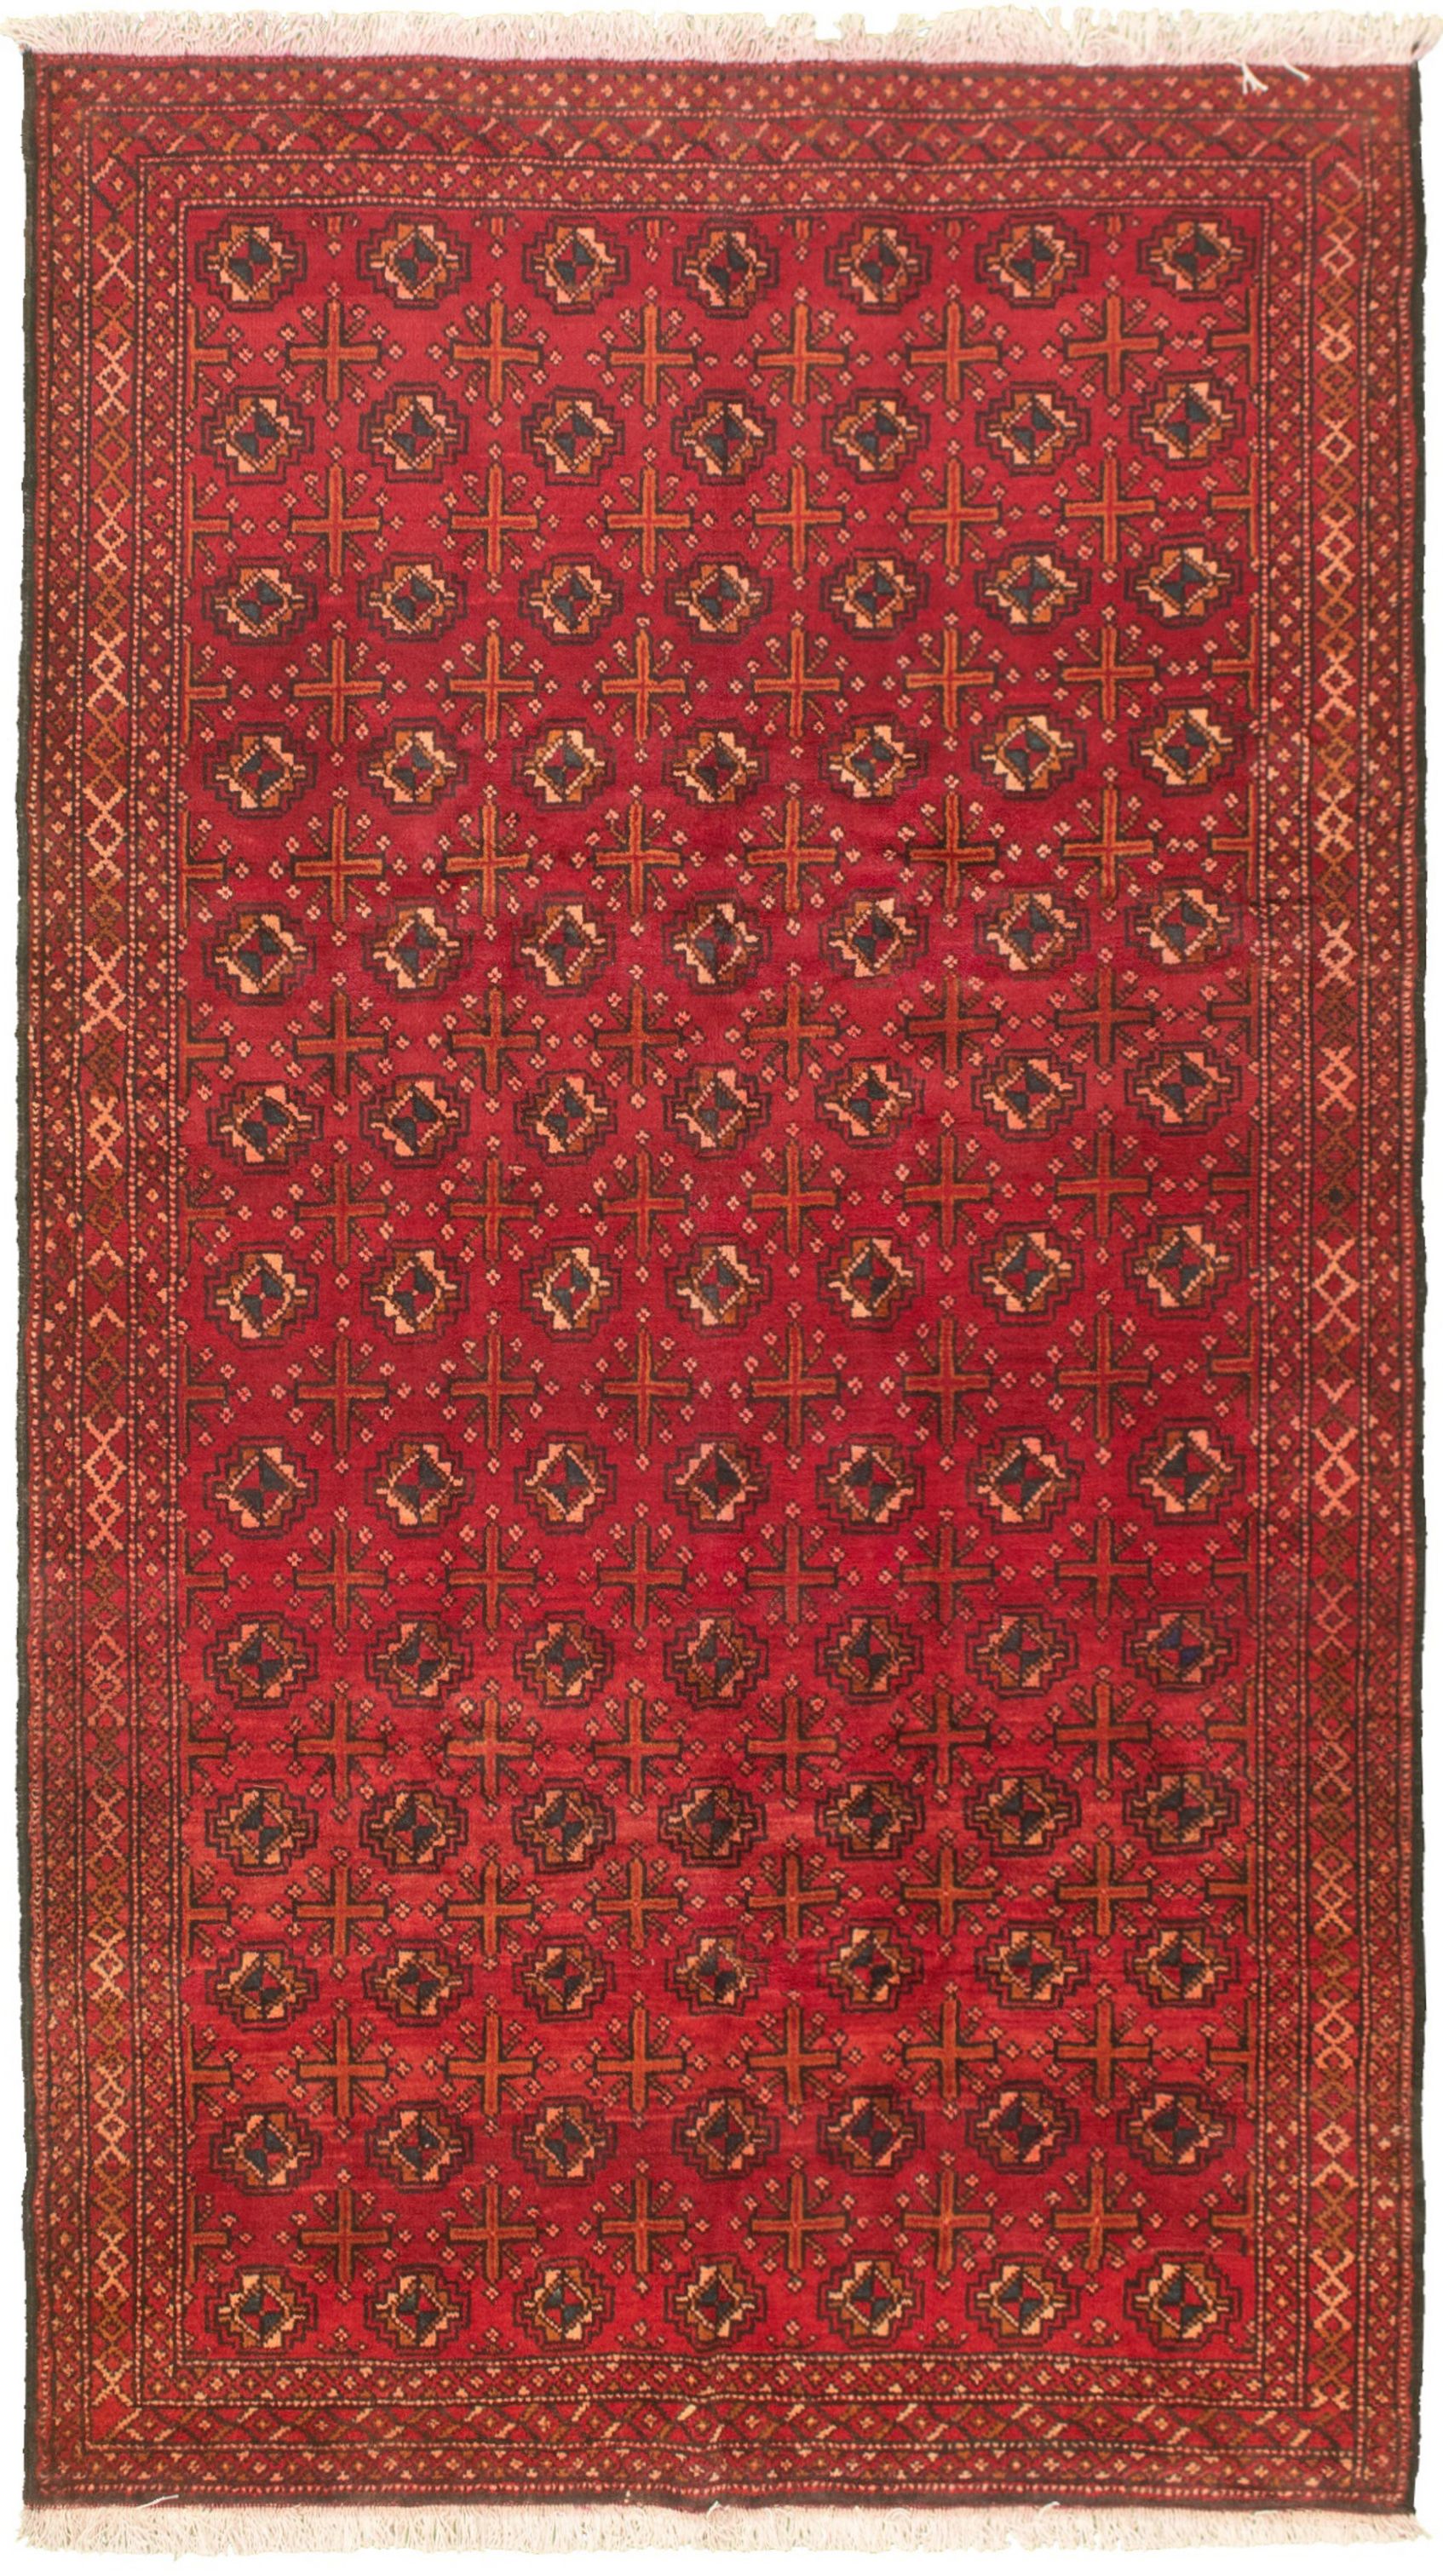 Hand-knotted Authentic Turkish Red Wool Rug 5'3" x 9'7"  Size: 5'3" x 9'7"  